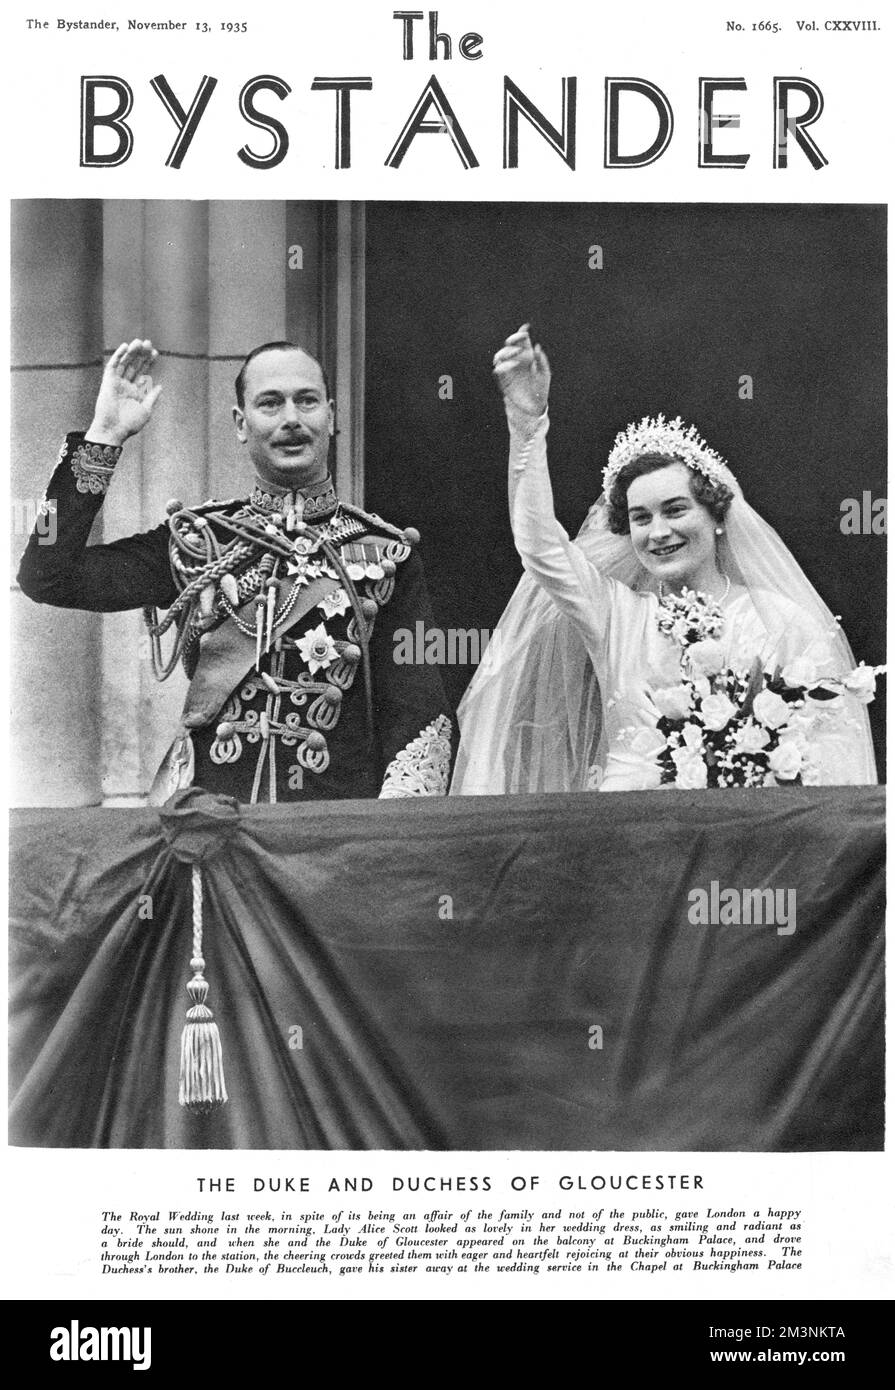 Henry, Duke of Gloucester and Lady Alice Montagu Douglas Scott, later Princess Alice, Duchess of Gloucester (1901-2004), waving from the balcony of Buckingham Palace on the occasion of their wedding in November 1935.      Date: 6 November 1935 Stock Photo